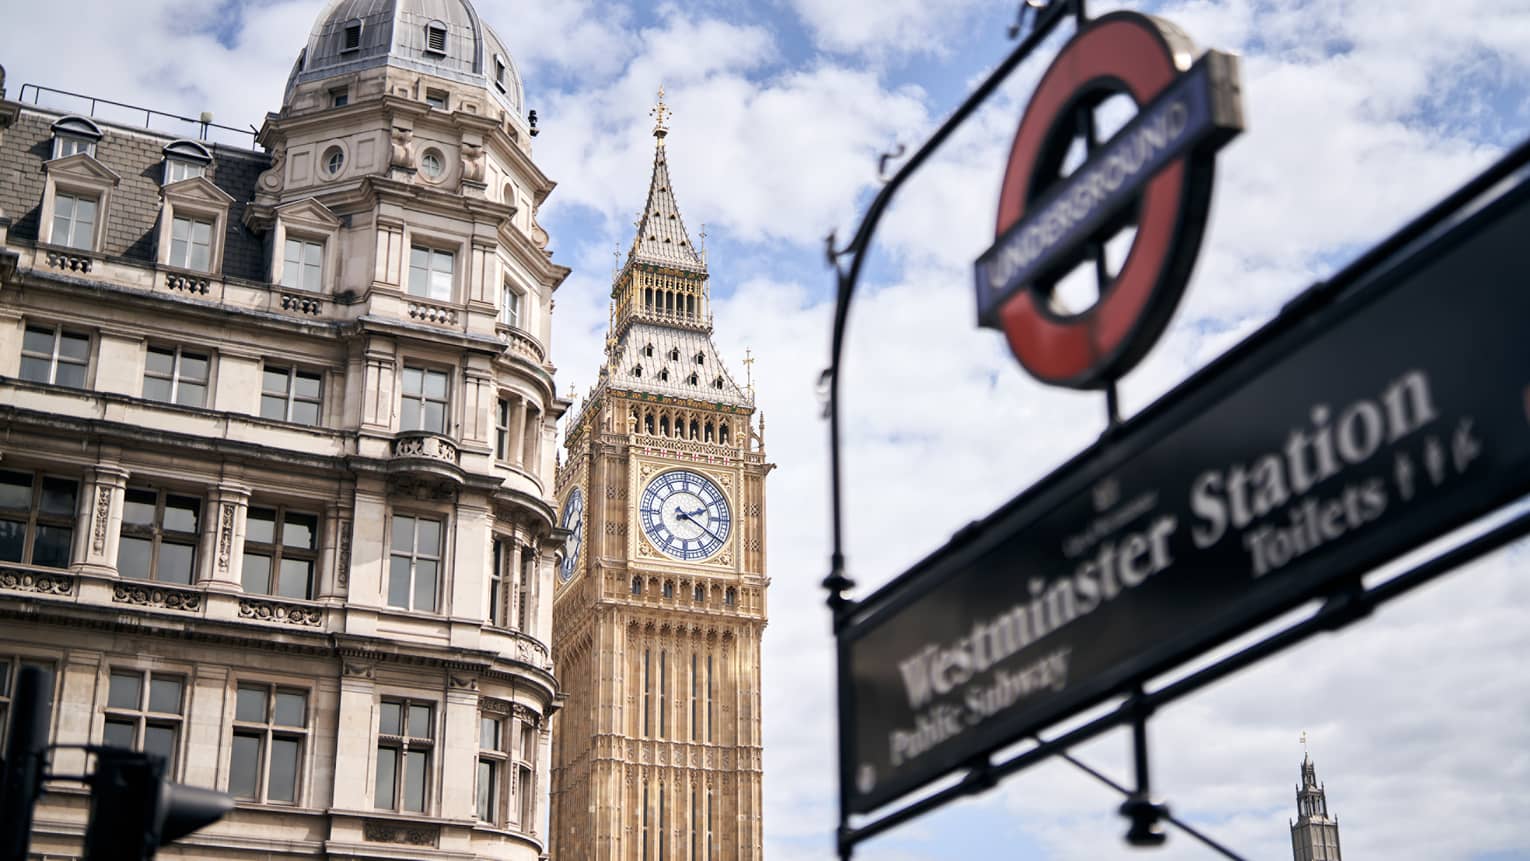 London Underground sign for Westminster Station in the foreground, Big Ben clock tower in the background.